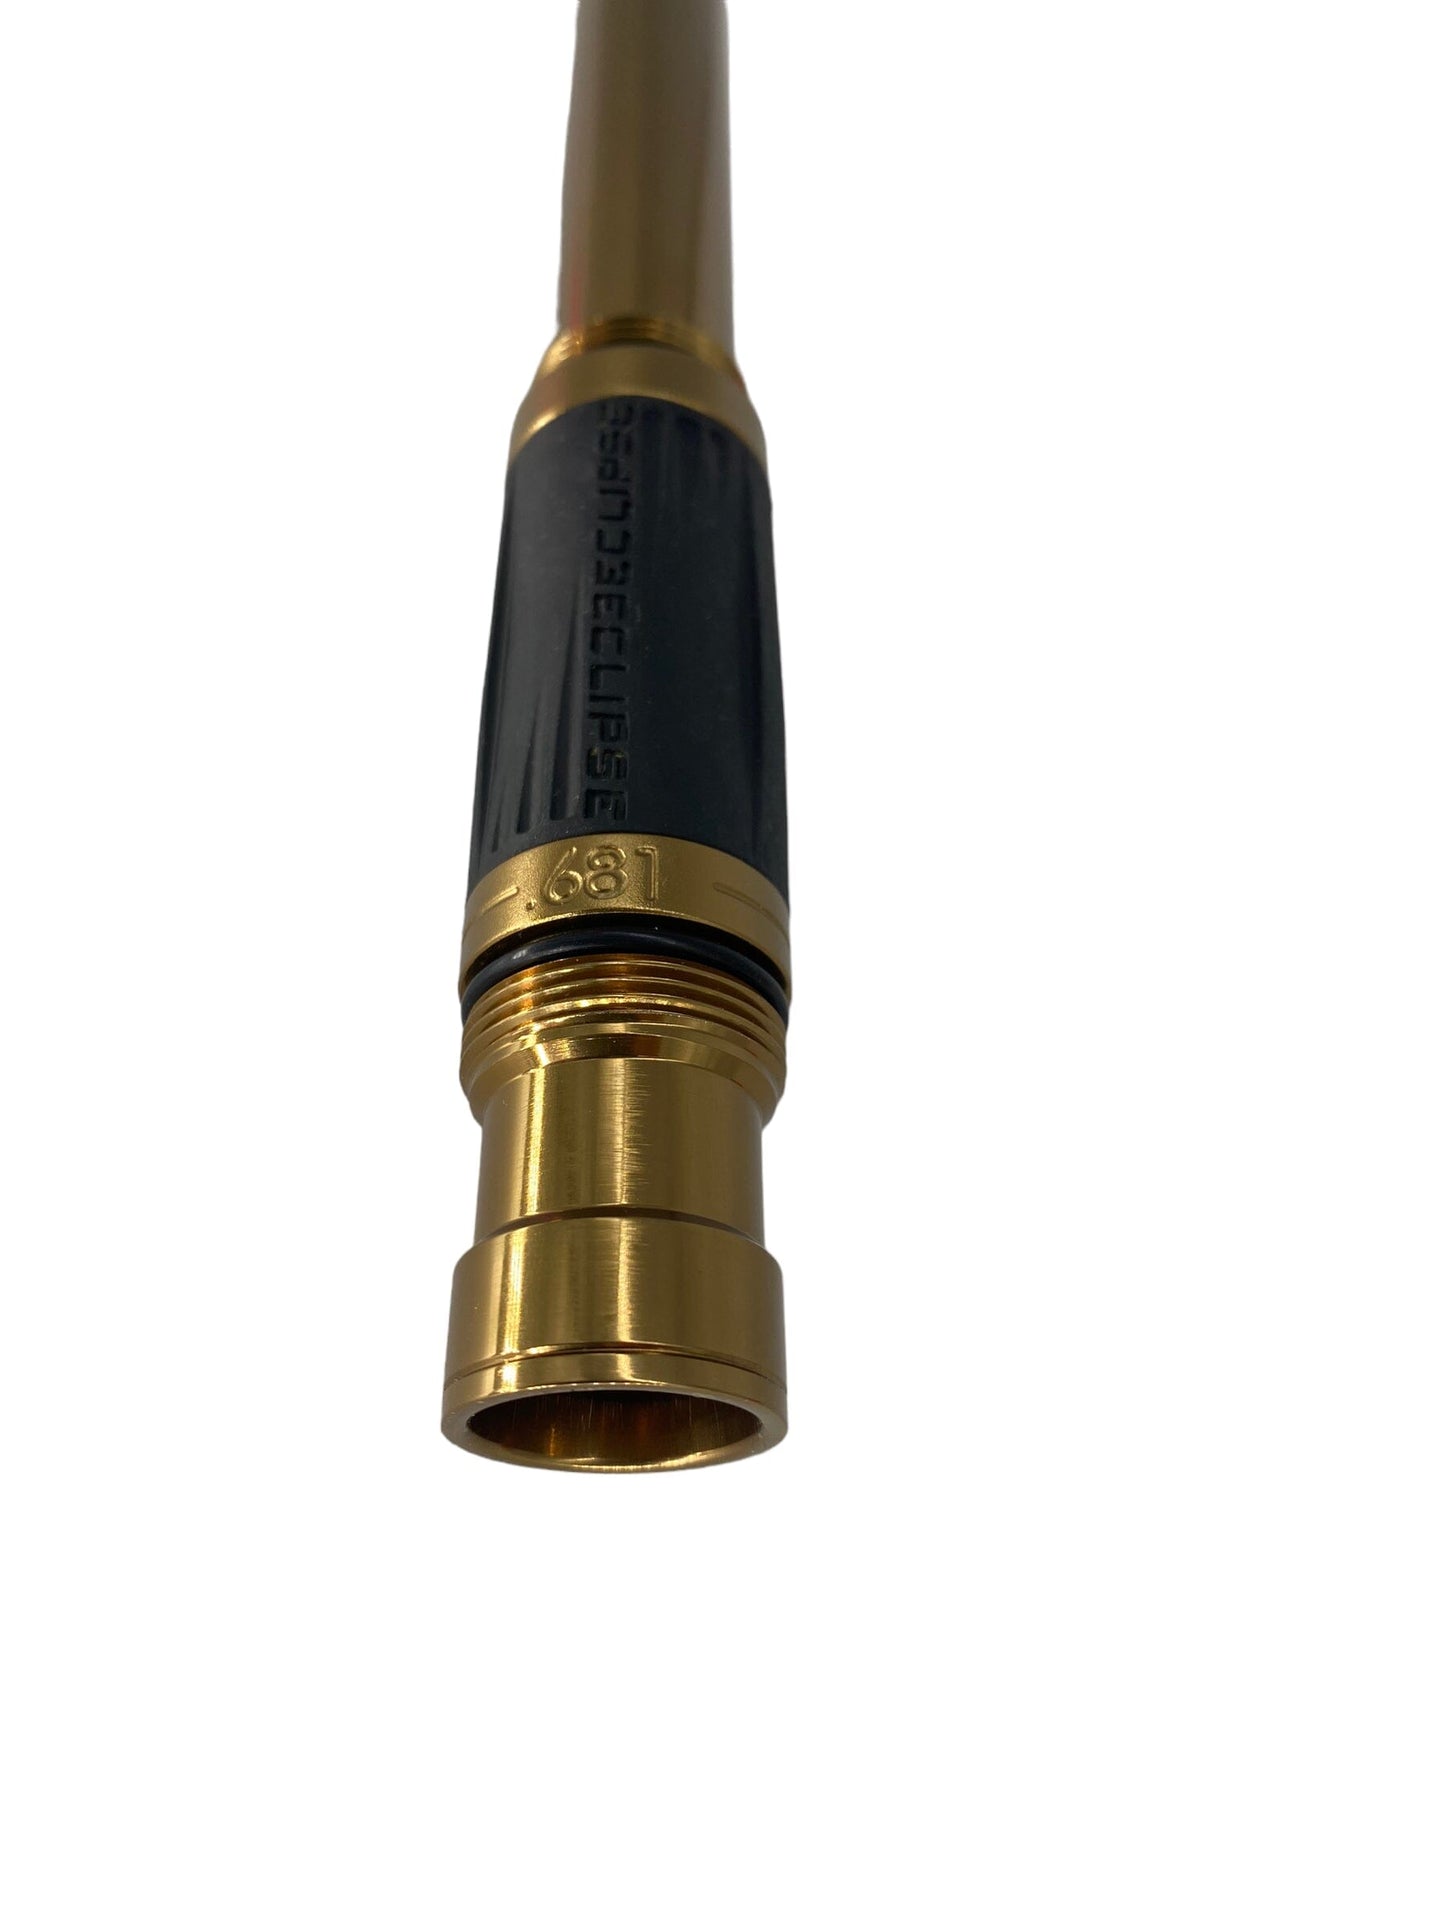 Used Planet Eclipse Fl Barrel Back- Bronze- .681 Paintball Gun from CPXBrosPaintball Buy/Sell/Trade Paintball Markers, Paintball Hoppers, Paintball Masks, and Hormesis Headbands